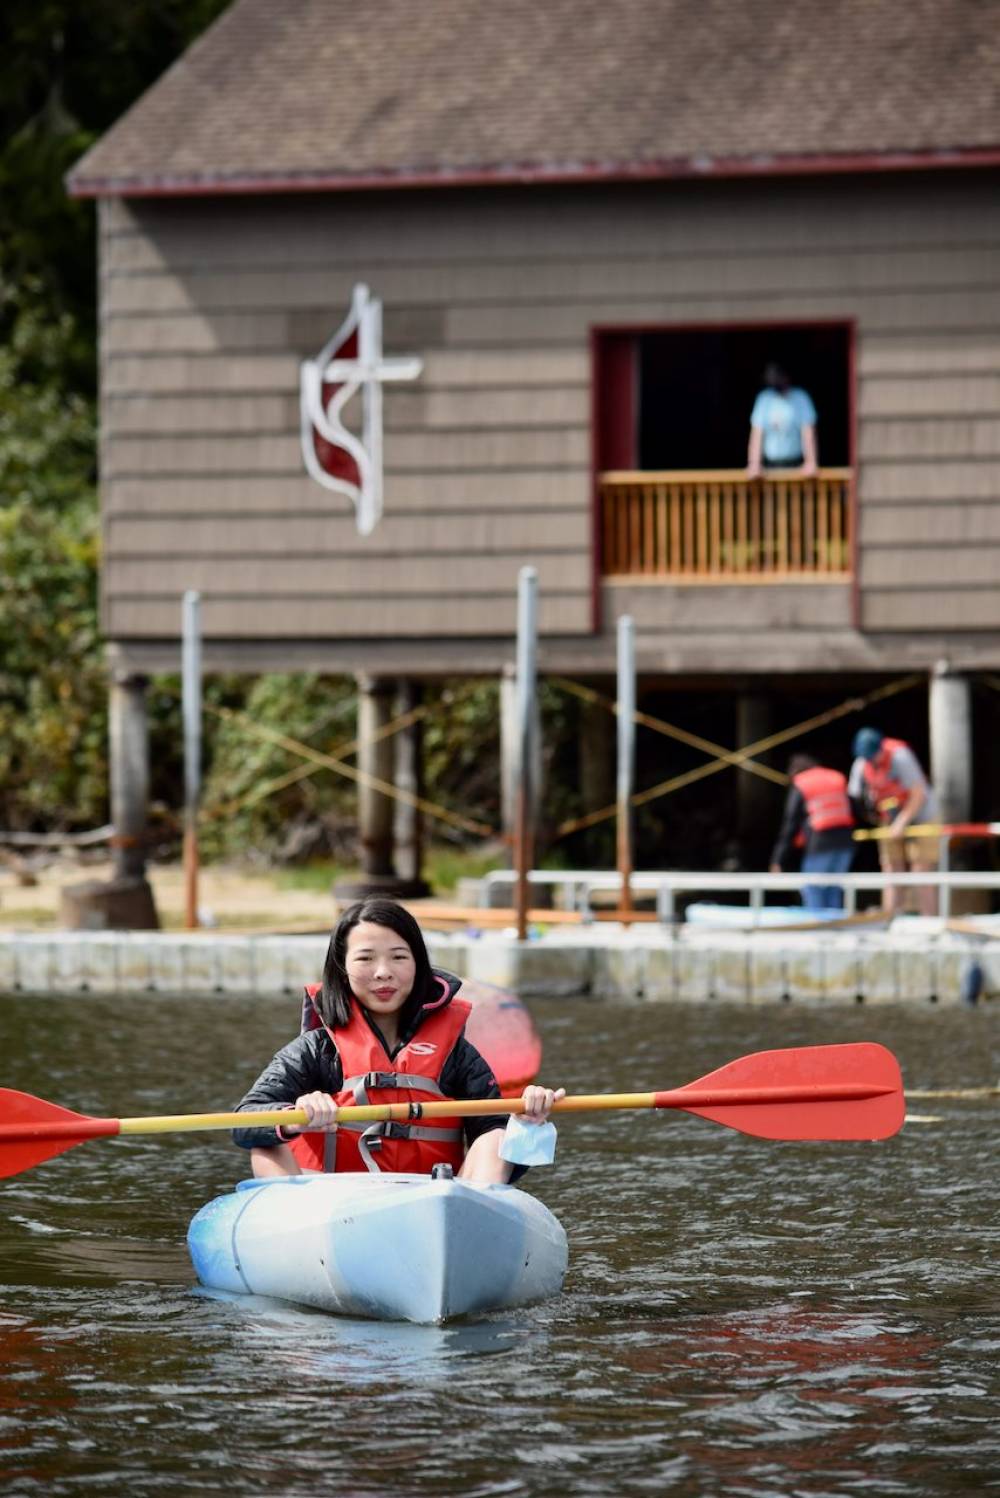 TOP OREGON SUMMER CAMP: Camp Magruder is a Top Summer Camp located in Rockaway Beach Oregon offering many fun and enriching camp programs. 